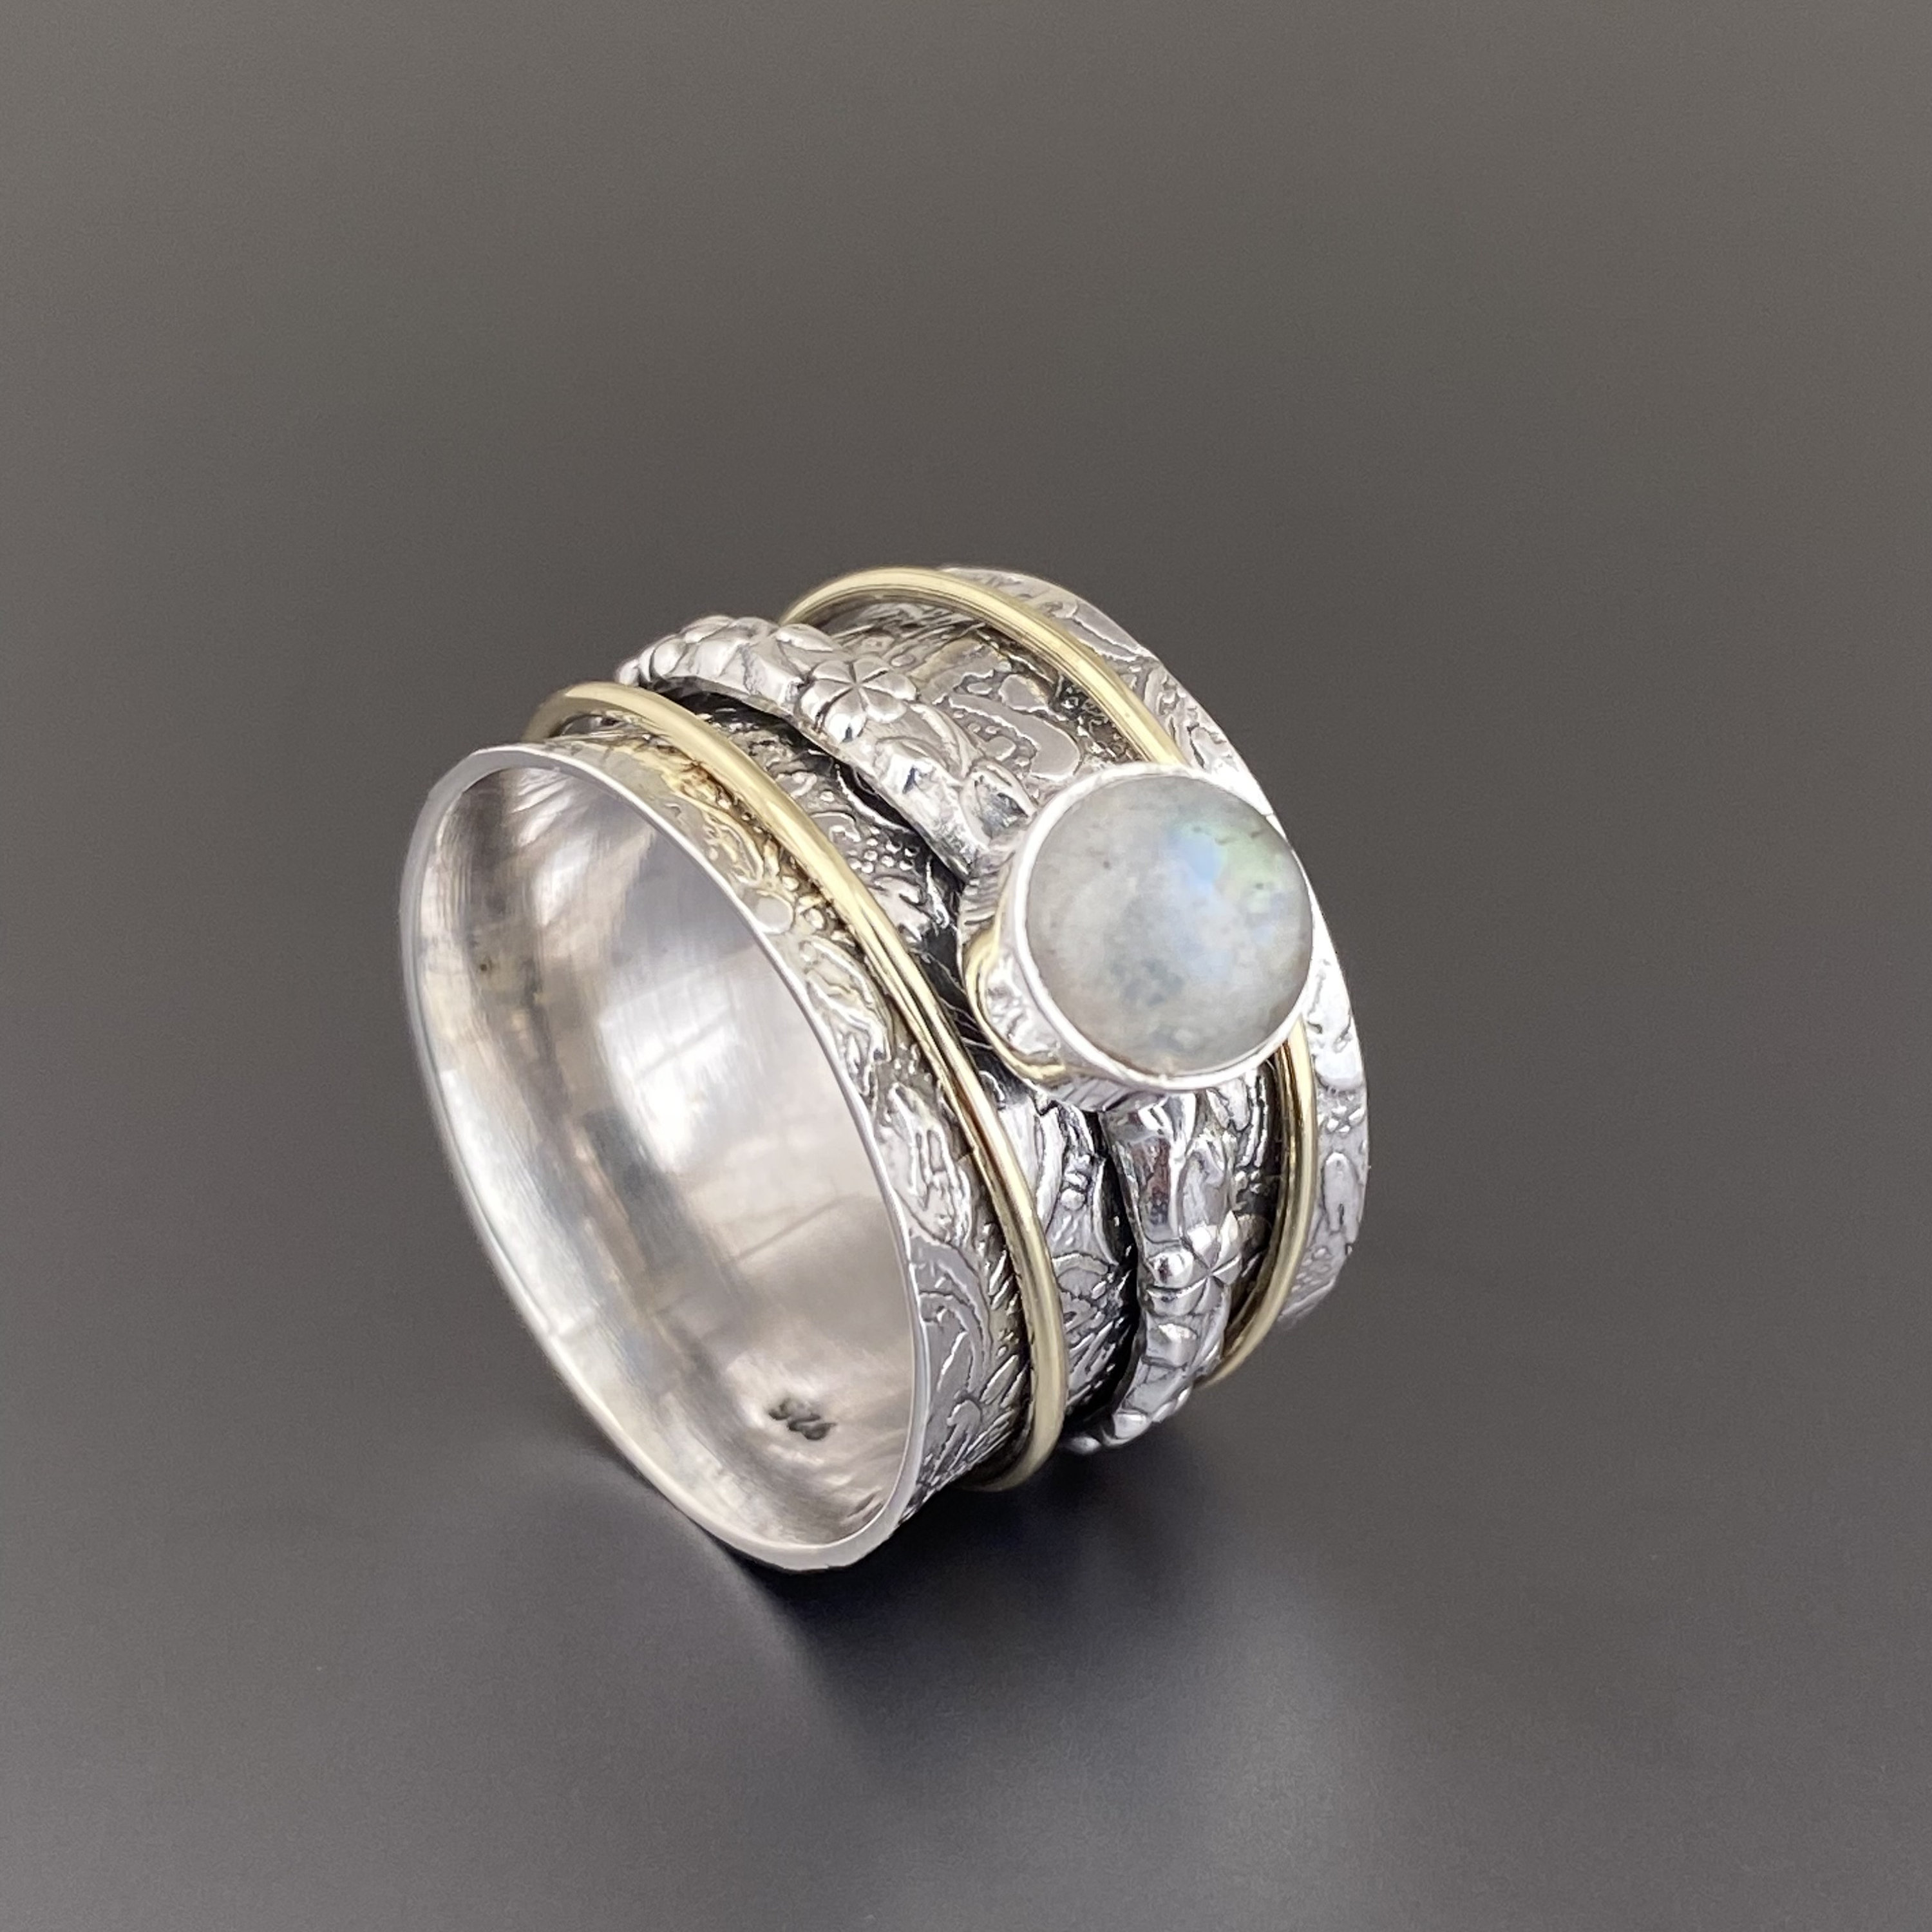 Buy Natural Moonstone Ring, 925 Solid Sterling Silver Ring, Moonstone  Silver Ring, Sterling Silver Ring, Rainbow Moonstone Ring, Boho Ring Online  in India - Etsy